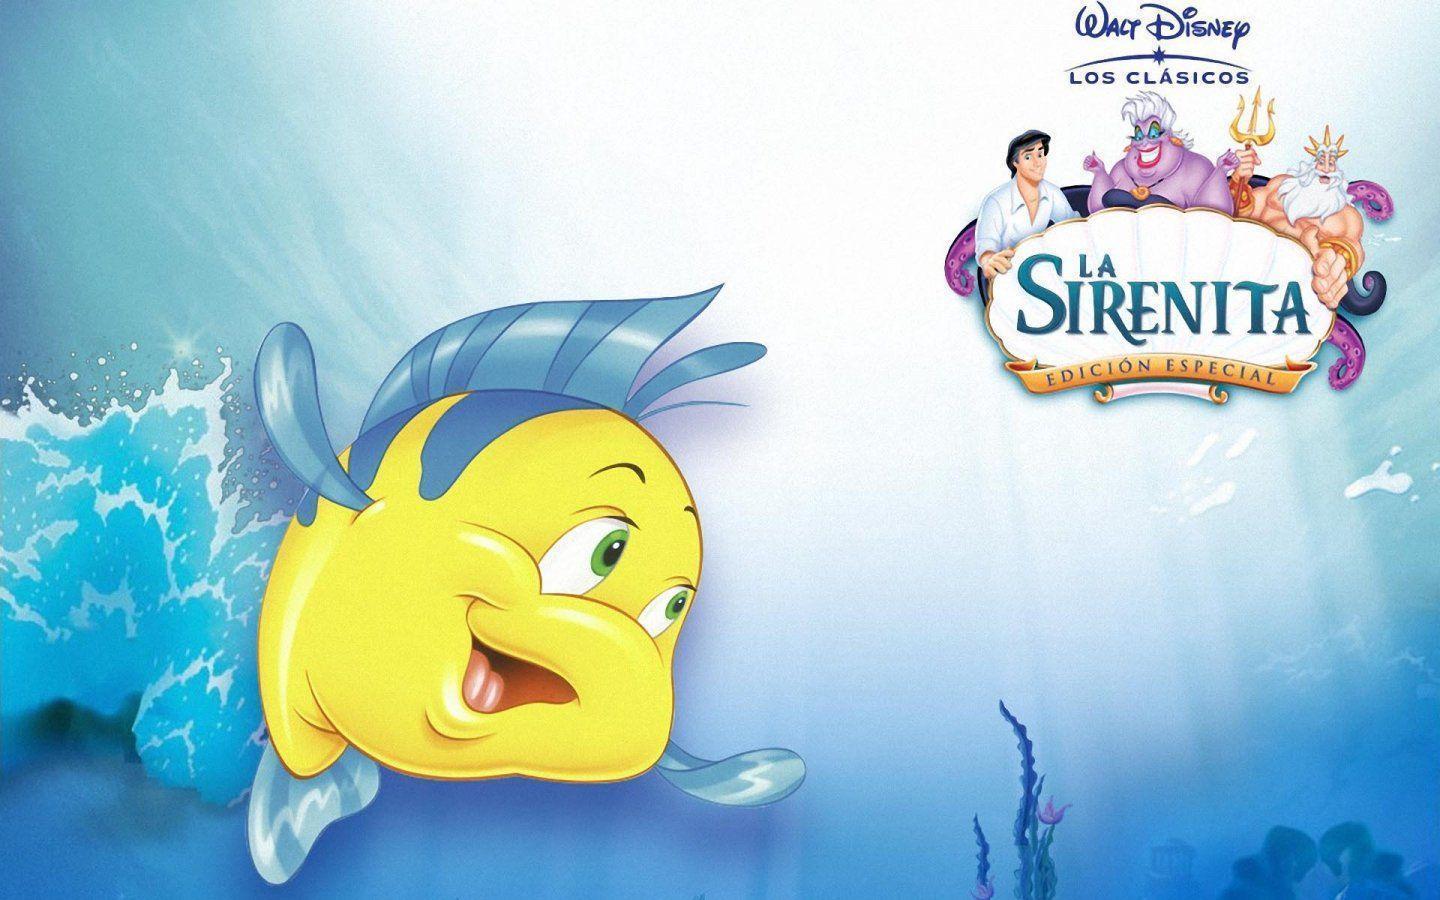 The Little Mermaid Wallpapers 1440x900 Wallpapers, 1440x900